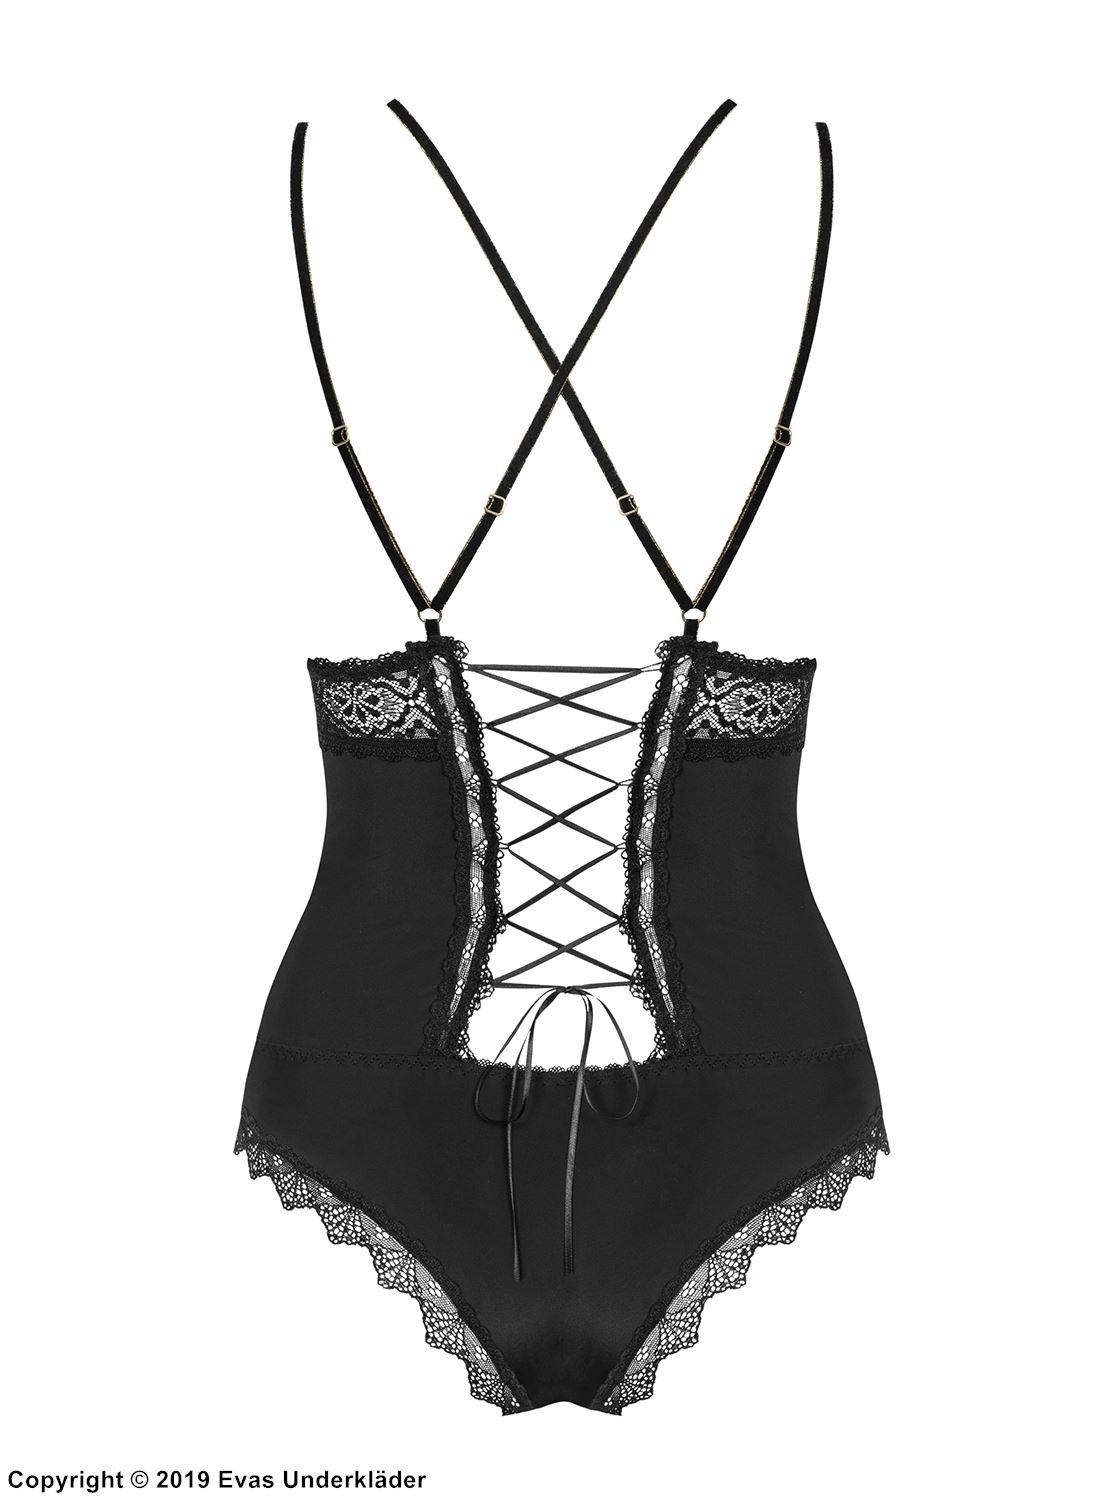 Teddy, lacing, lace details, crossing straps